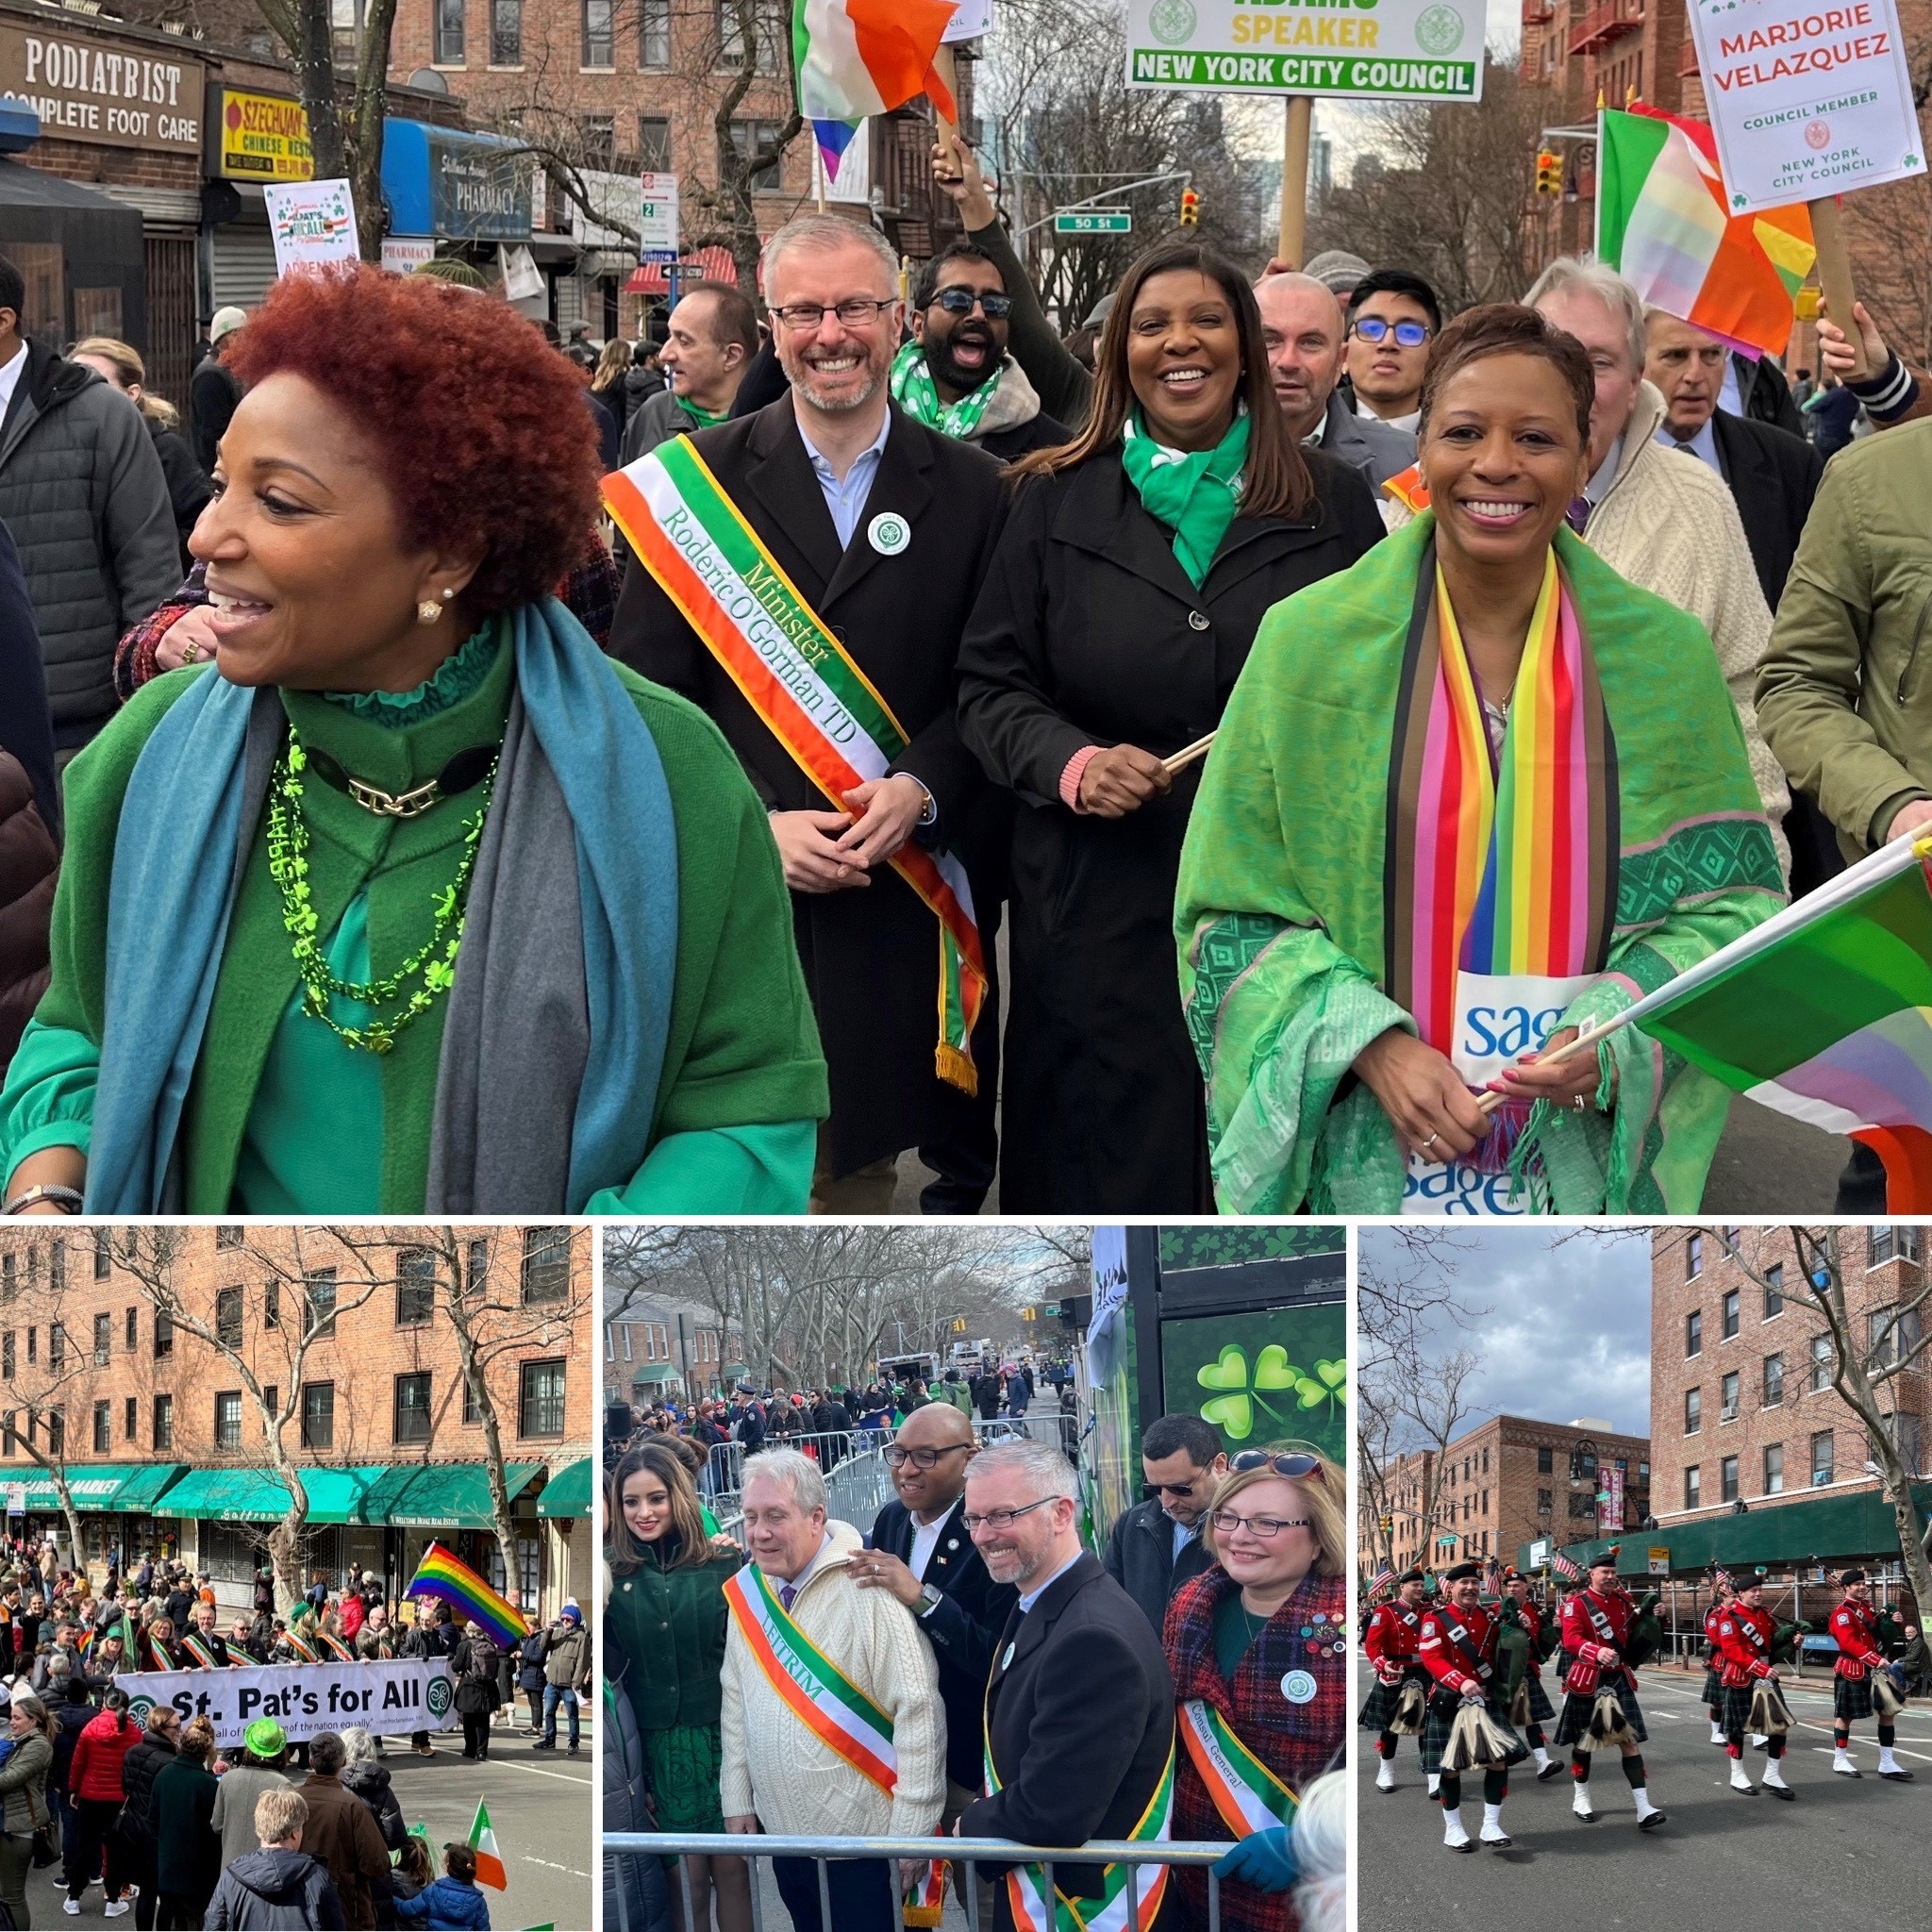 Minister Roderic O’Gorman Hails Diversity at St Pat’s for All Parade